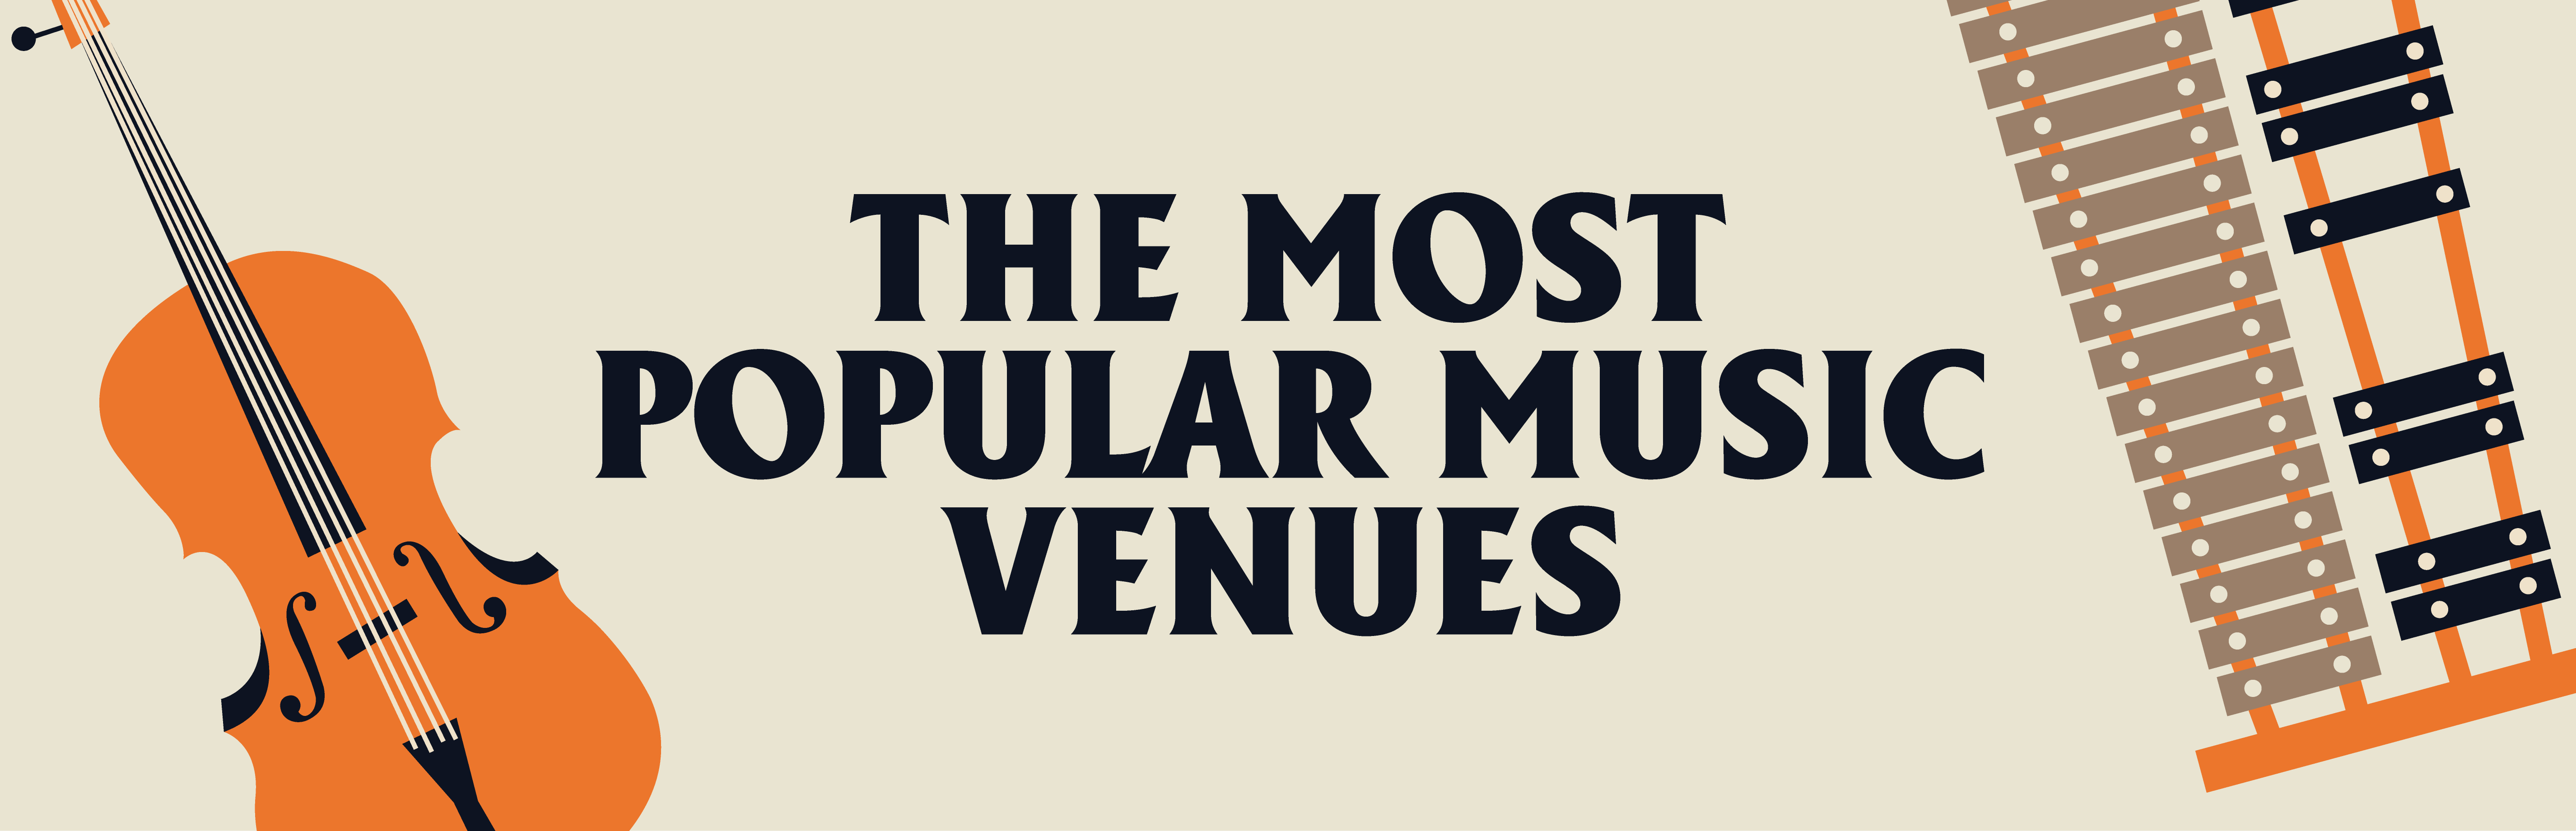 Play That Funky Music: The World’s Most Popular Music Venues